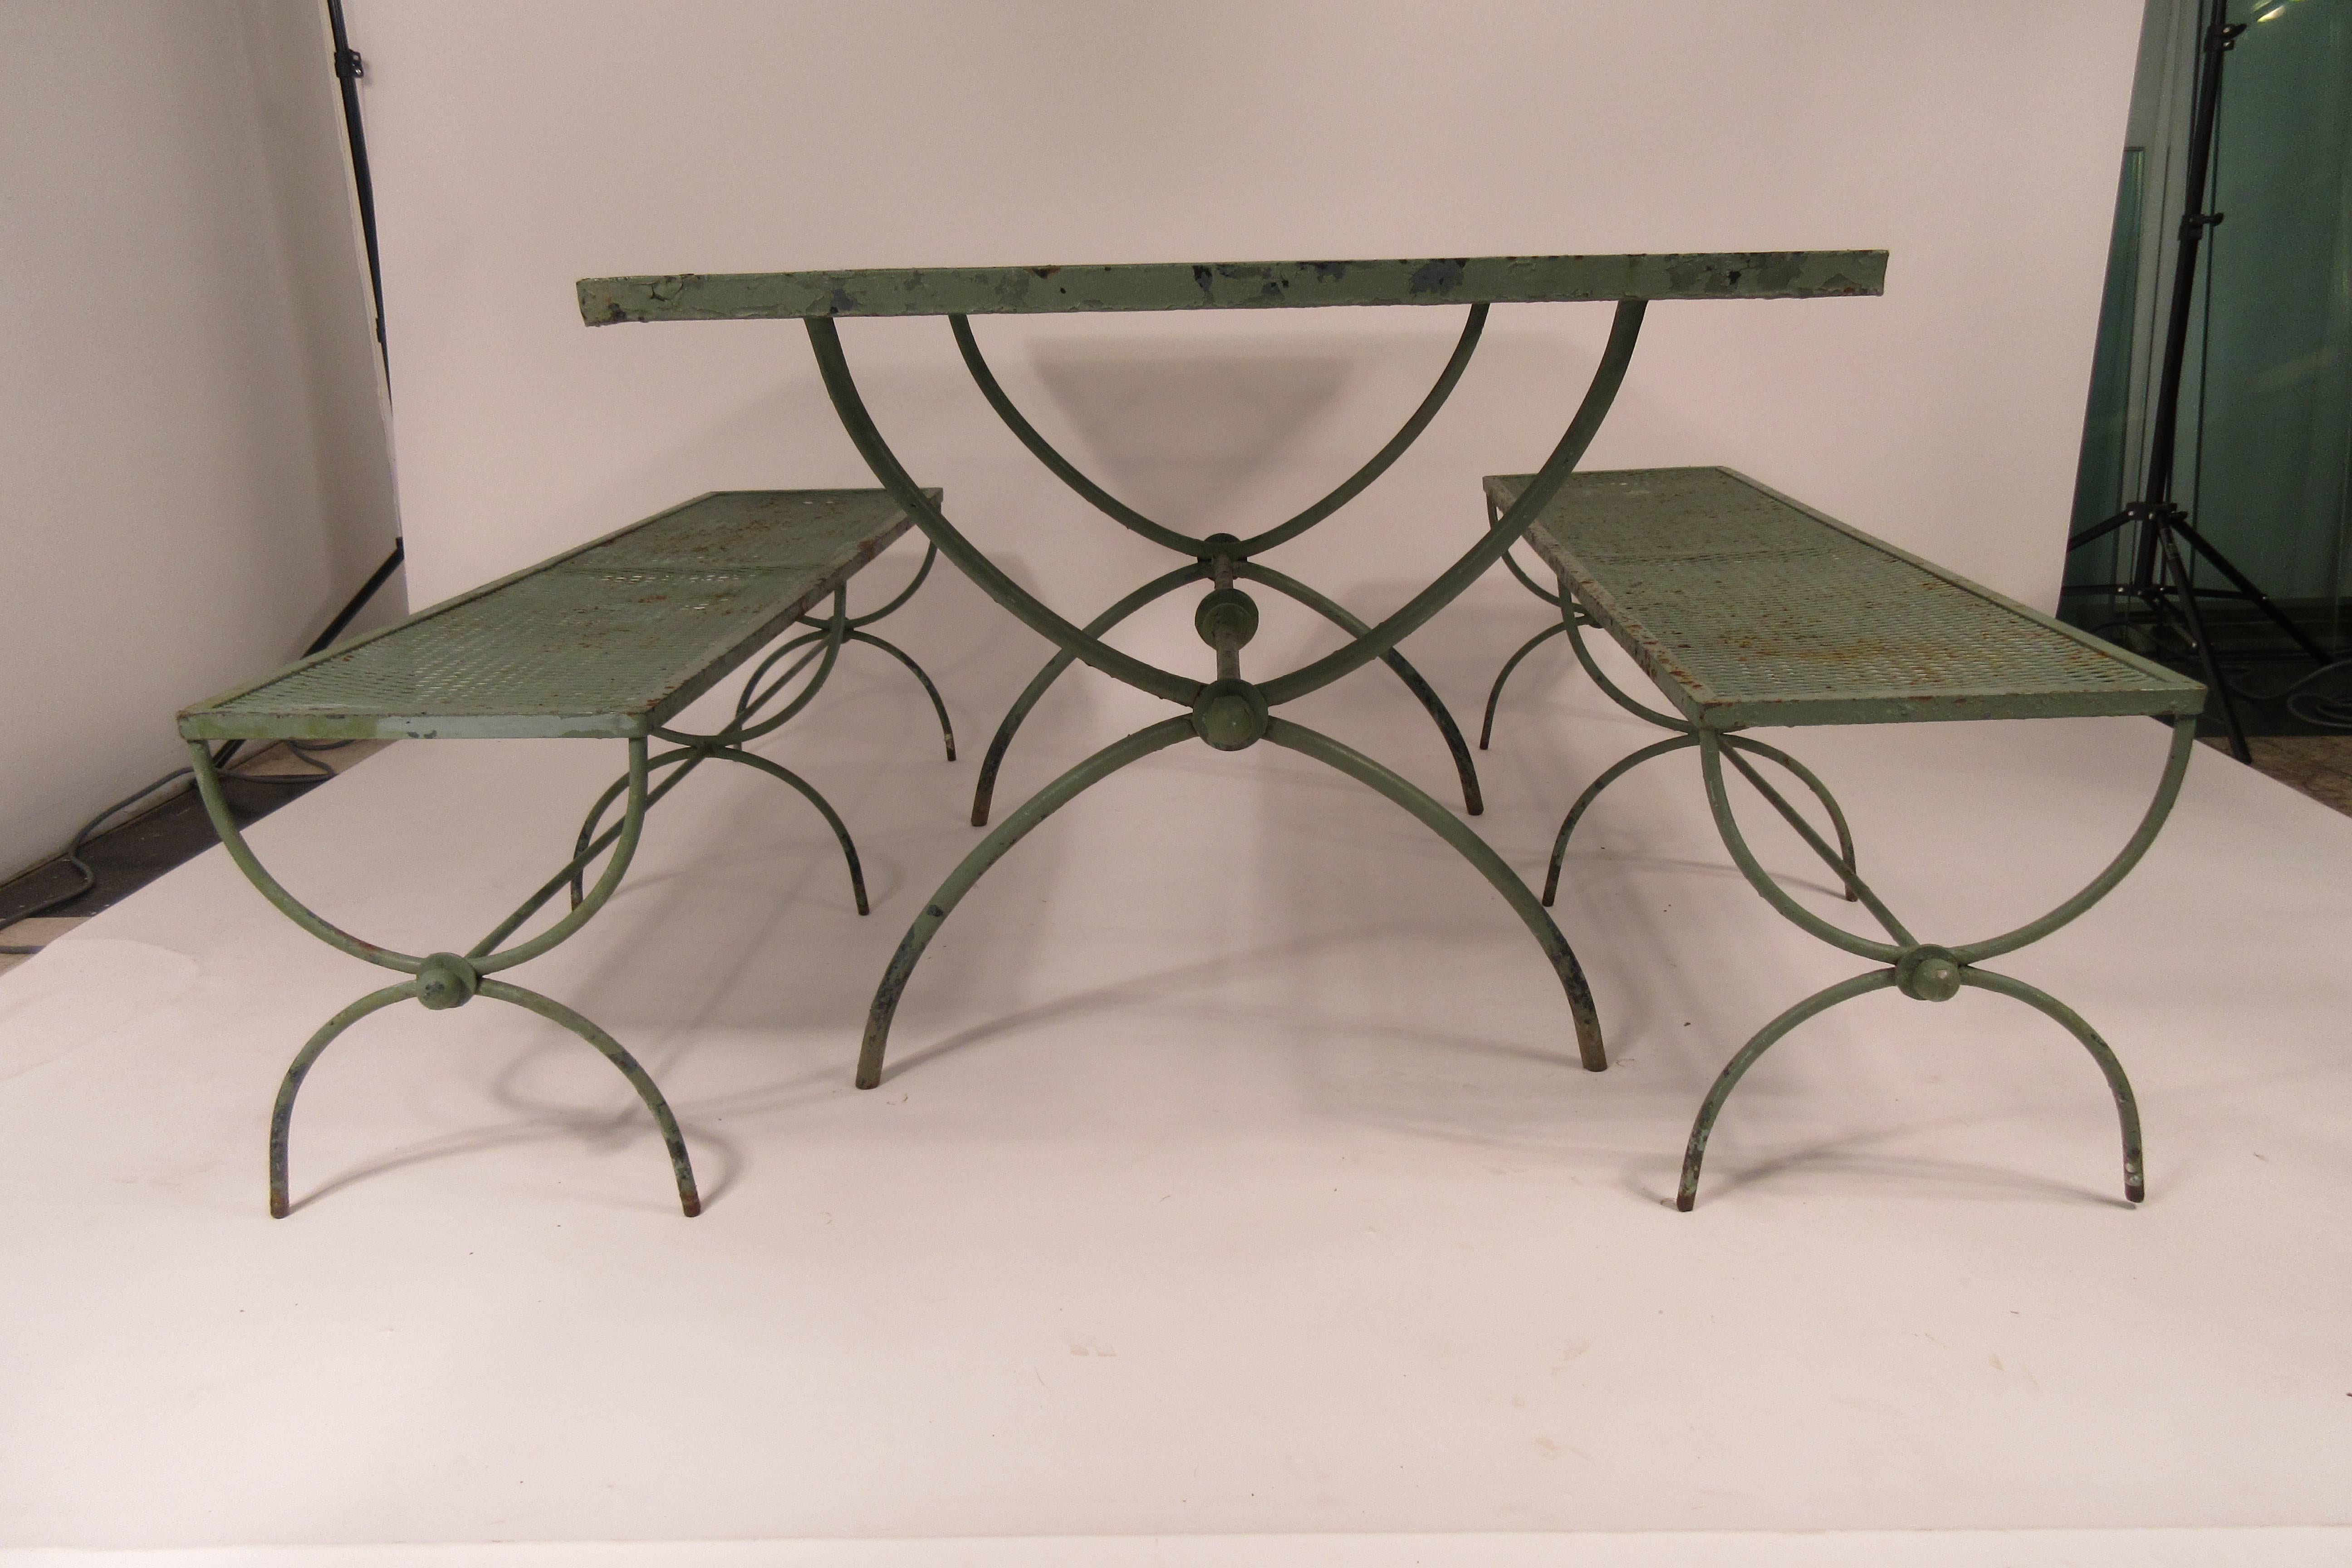 1950s classical outdoor table set. Unique design.
Reasonable delivery rates to the New York Tri State area.